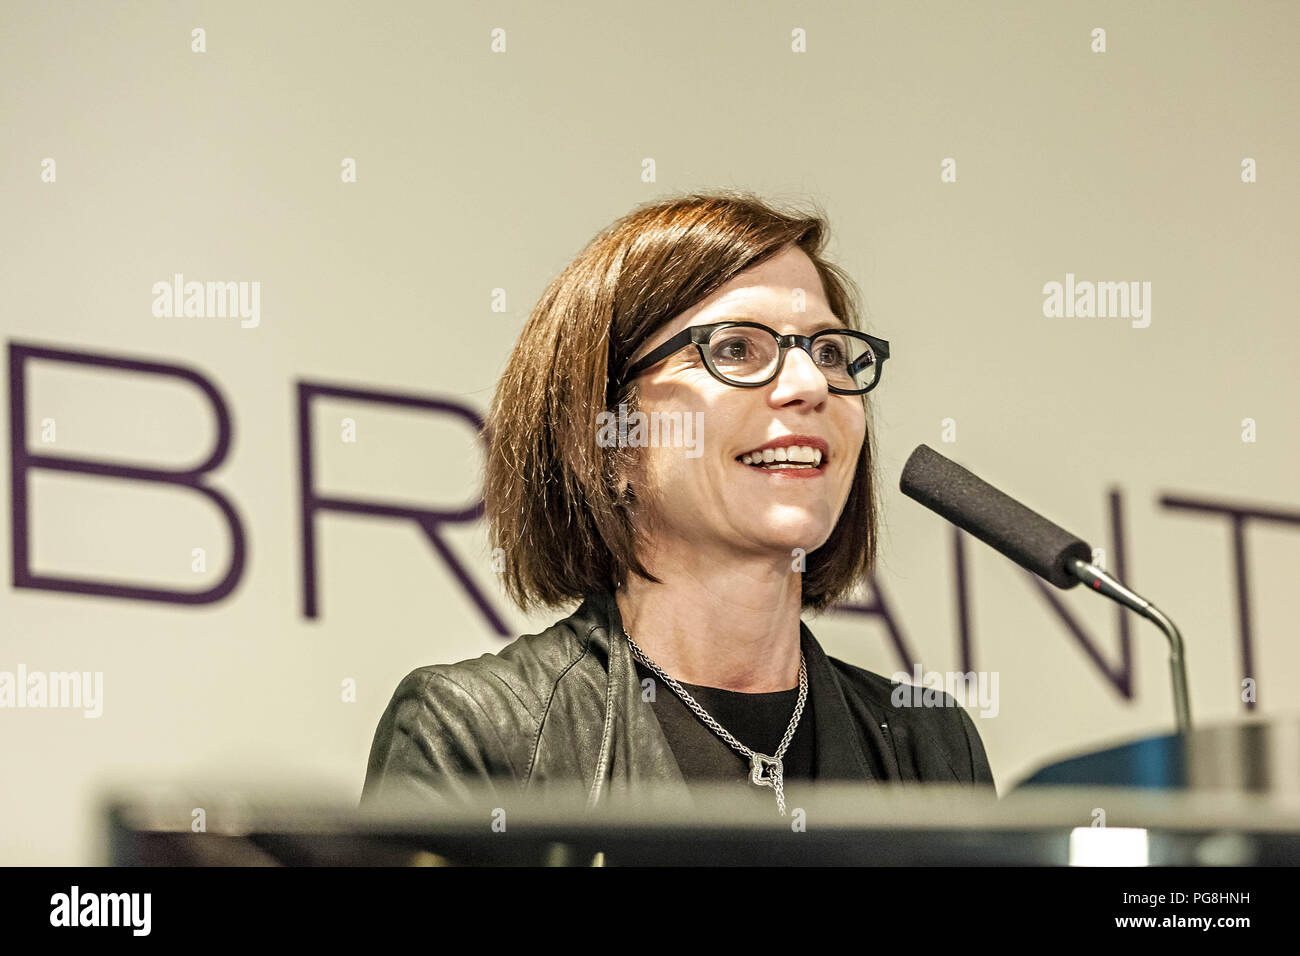 April 11, 2014 - Columbus, Ohio, U.S - Lane Bryant CEO LINDA HEASLEY photographed during a town hall meeting & fashion Show photographed April 11, 2014 at Lane Bryant's Columbus, Ohio headquarters. (Credit Image: © James D. DeCamp via ZUMA Wire) Stock Photo